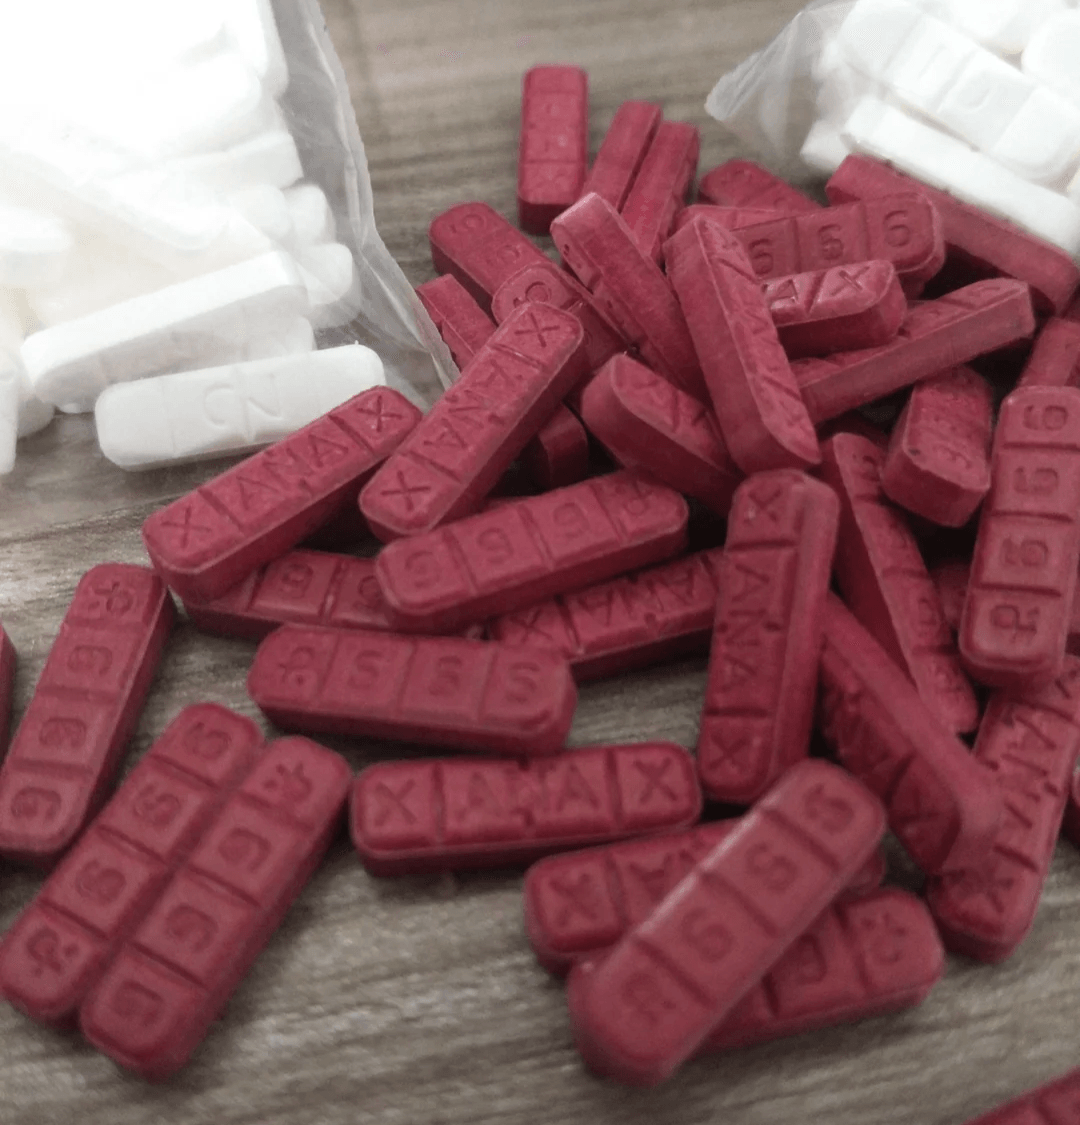 What is Red Xanax?